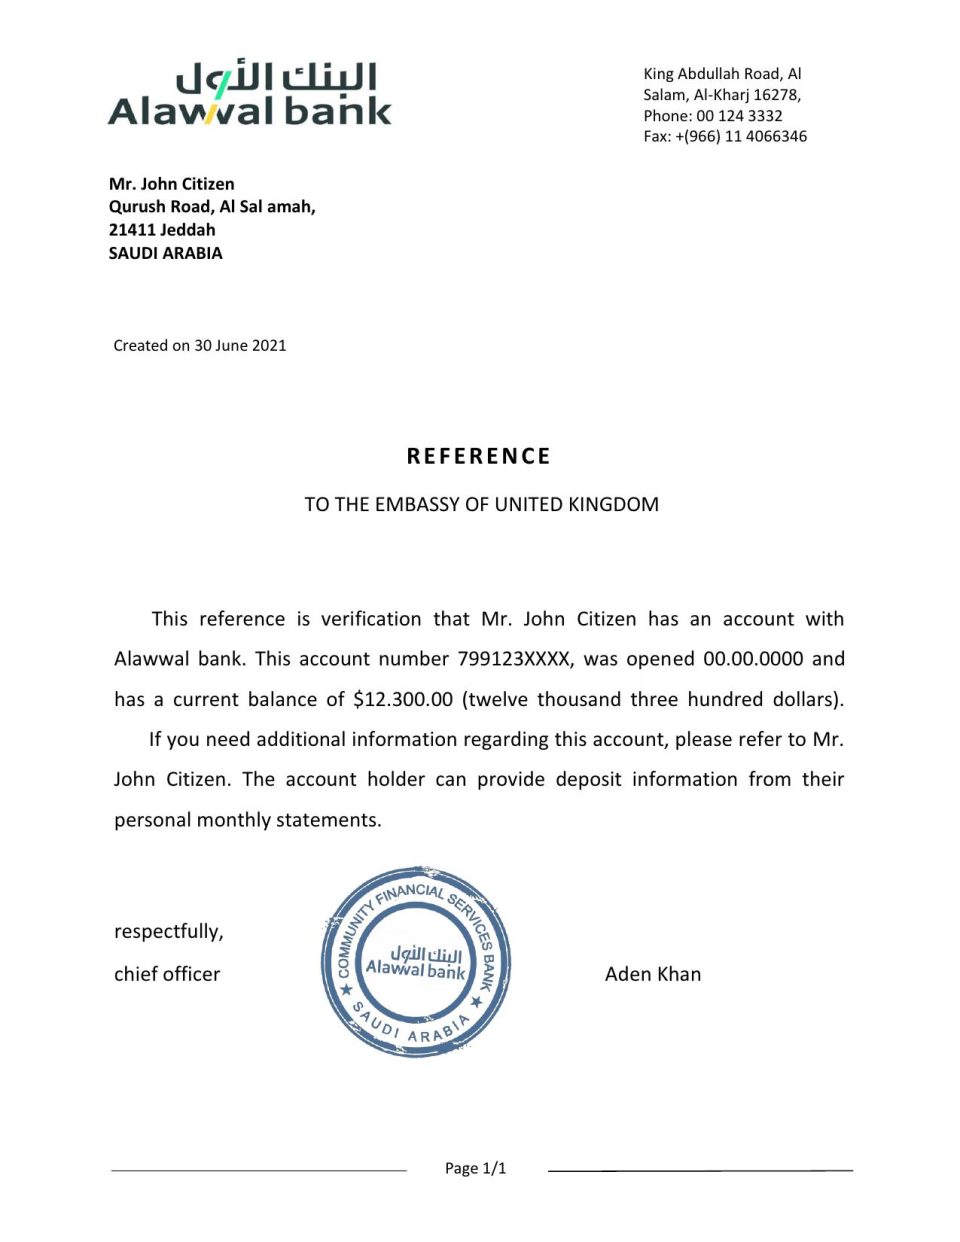 Download Saudi Arabia Alawwal Bank Reference Letter Templates | Editable Word